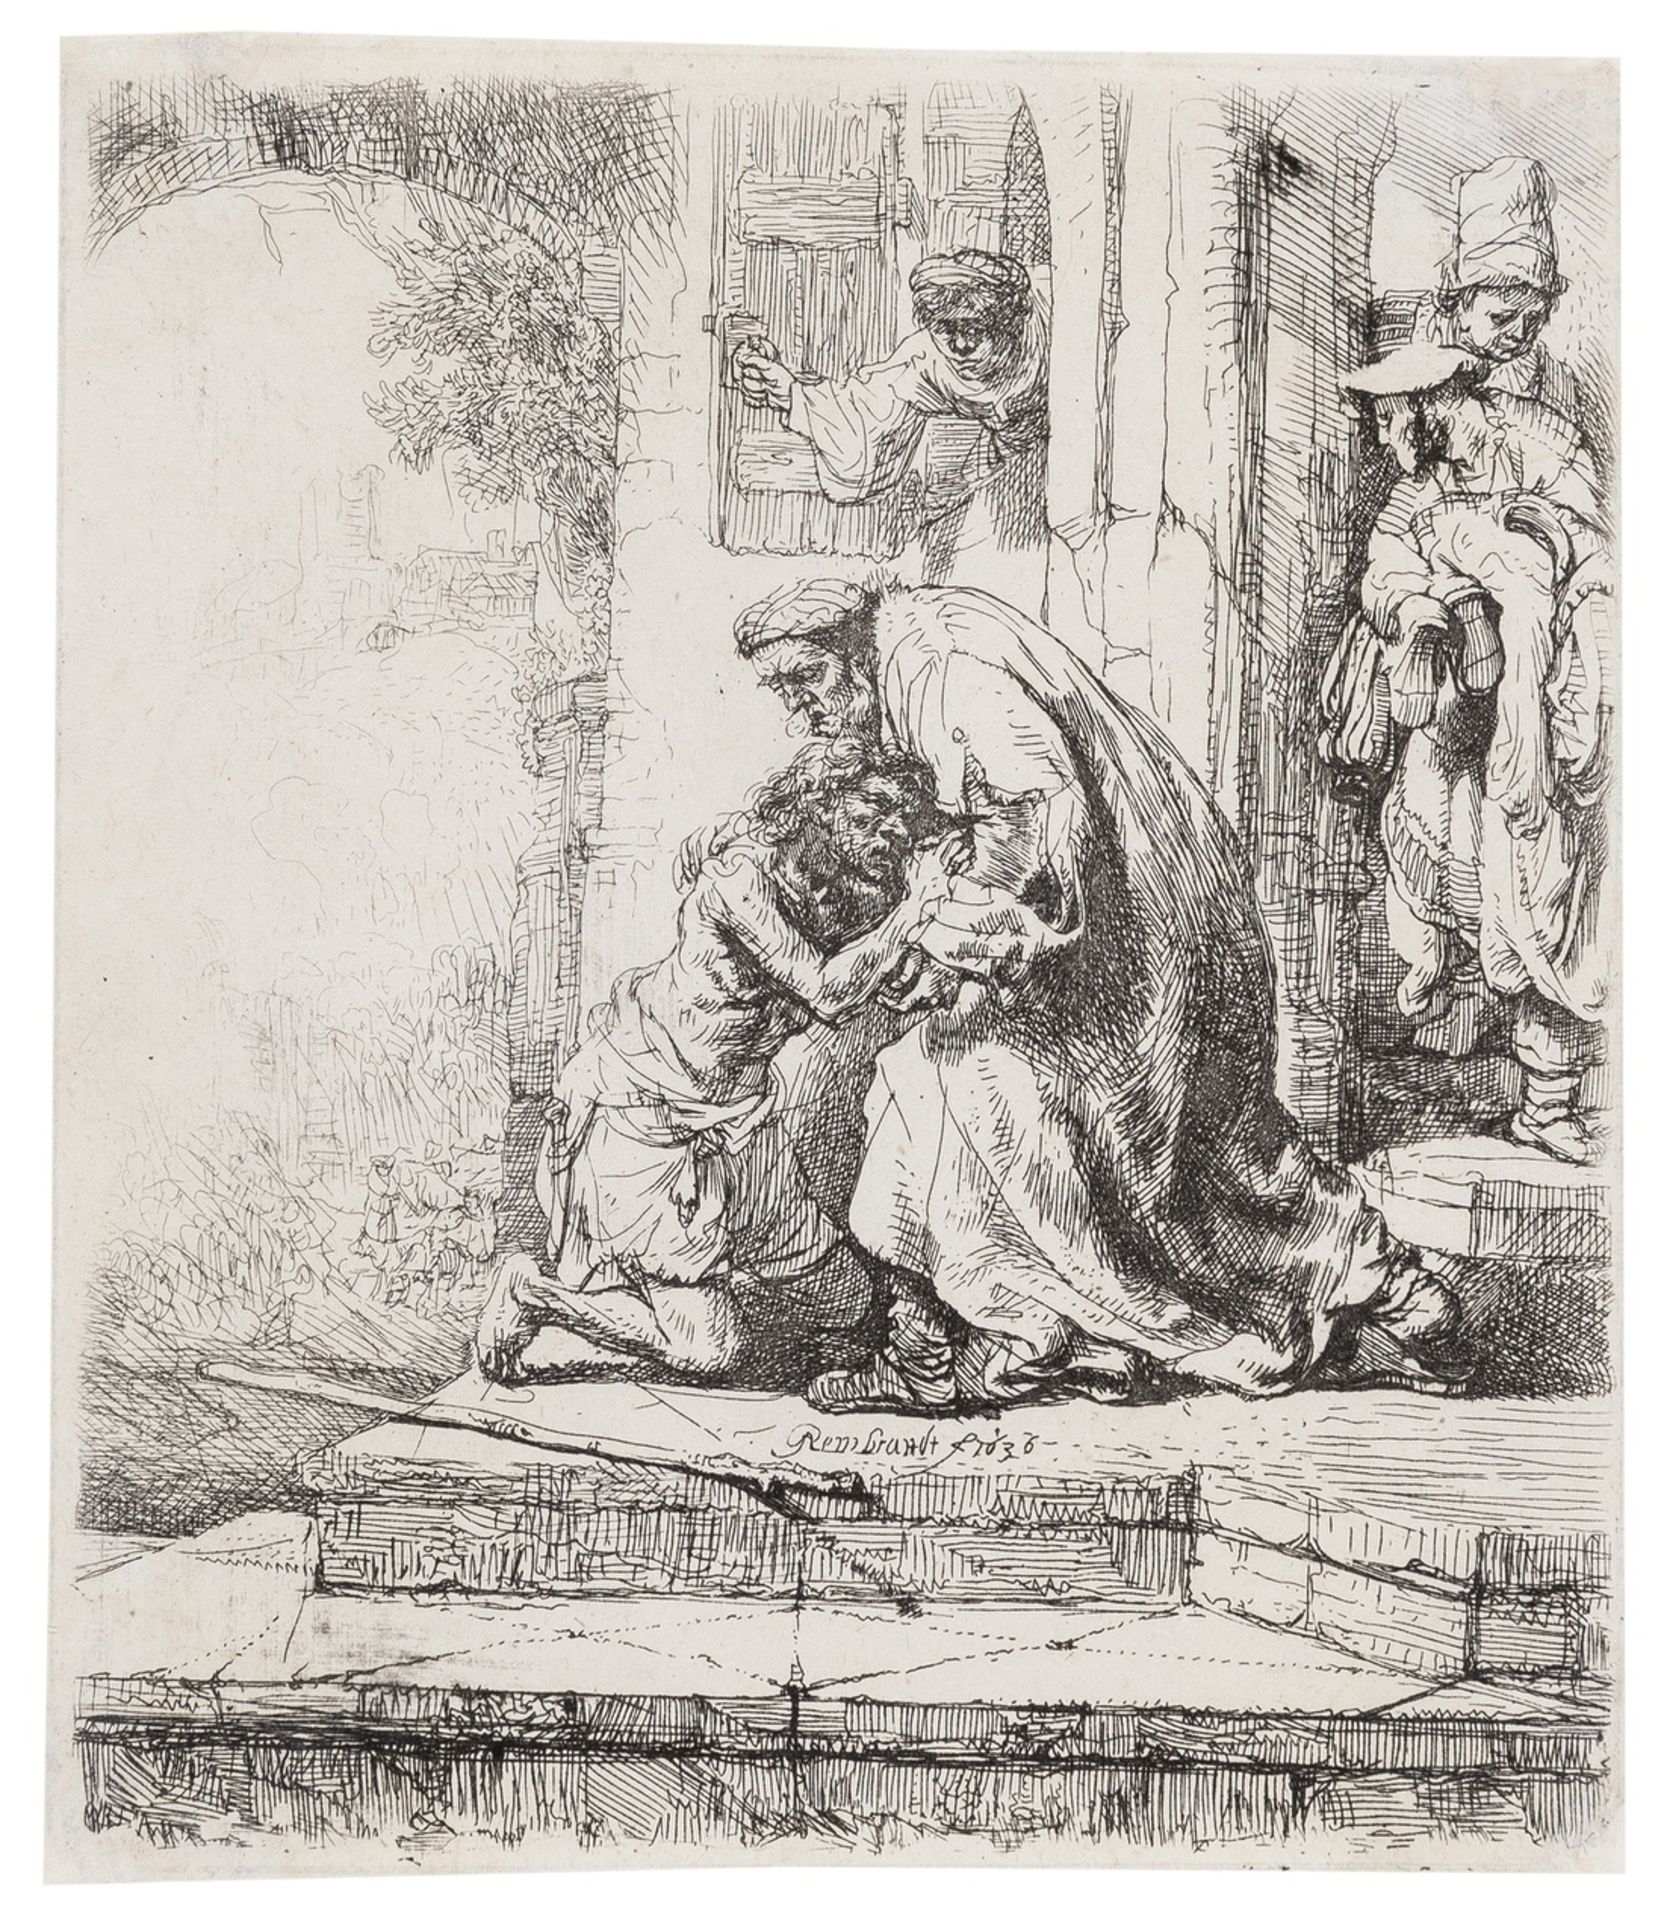 Rembrandt van Rijn (1606-1669) The Return of the Prodigal Son; and another (2)